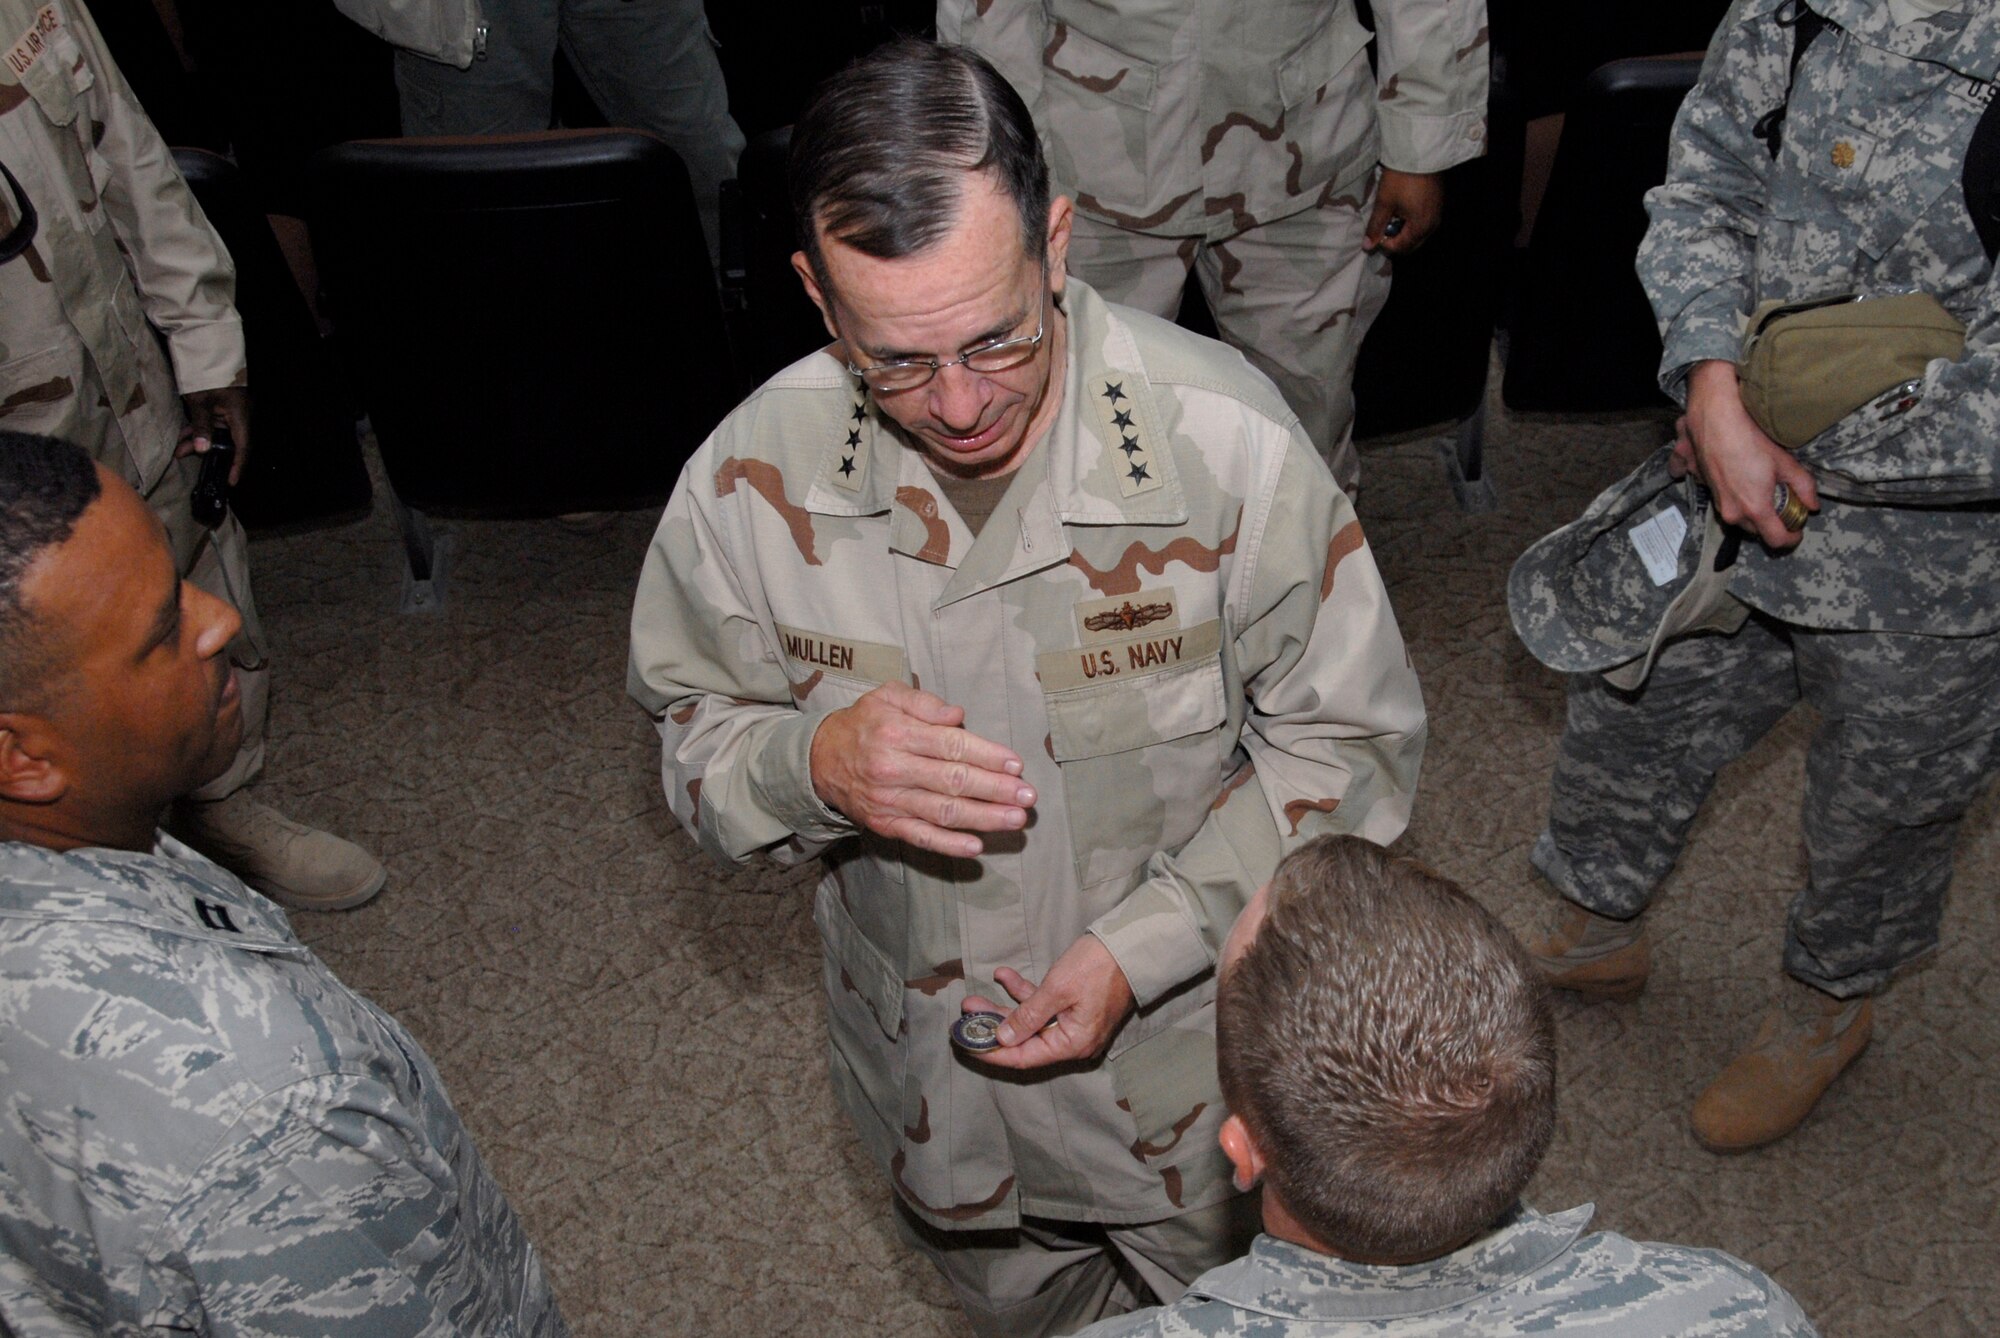 SOUTHWEST ASIA -- Navy Admiral Mike Mullen, chairman of the Joint Chiefs of Staff, speaks with Airmen from the 386th Air Expeditionary Wing July 7, 2008, at the theatre on an air base in the Persian Gulf Region. Admiral Mullen is on a seven-day, summer troop visit and United Service Organizations tour. (U.S. Air Force photo/Staff Sgt. Patrick Dixon)